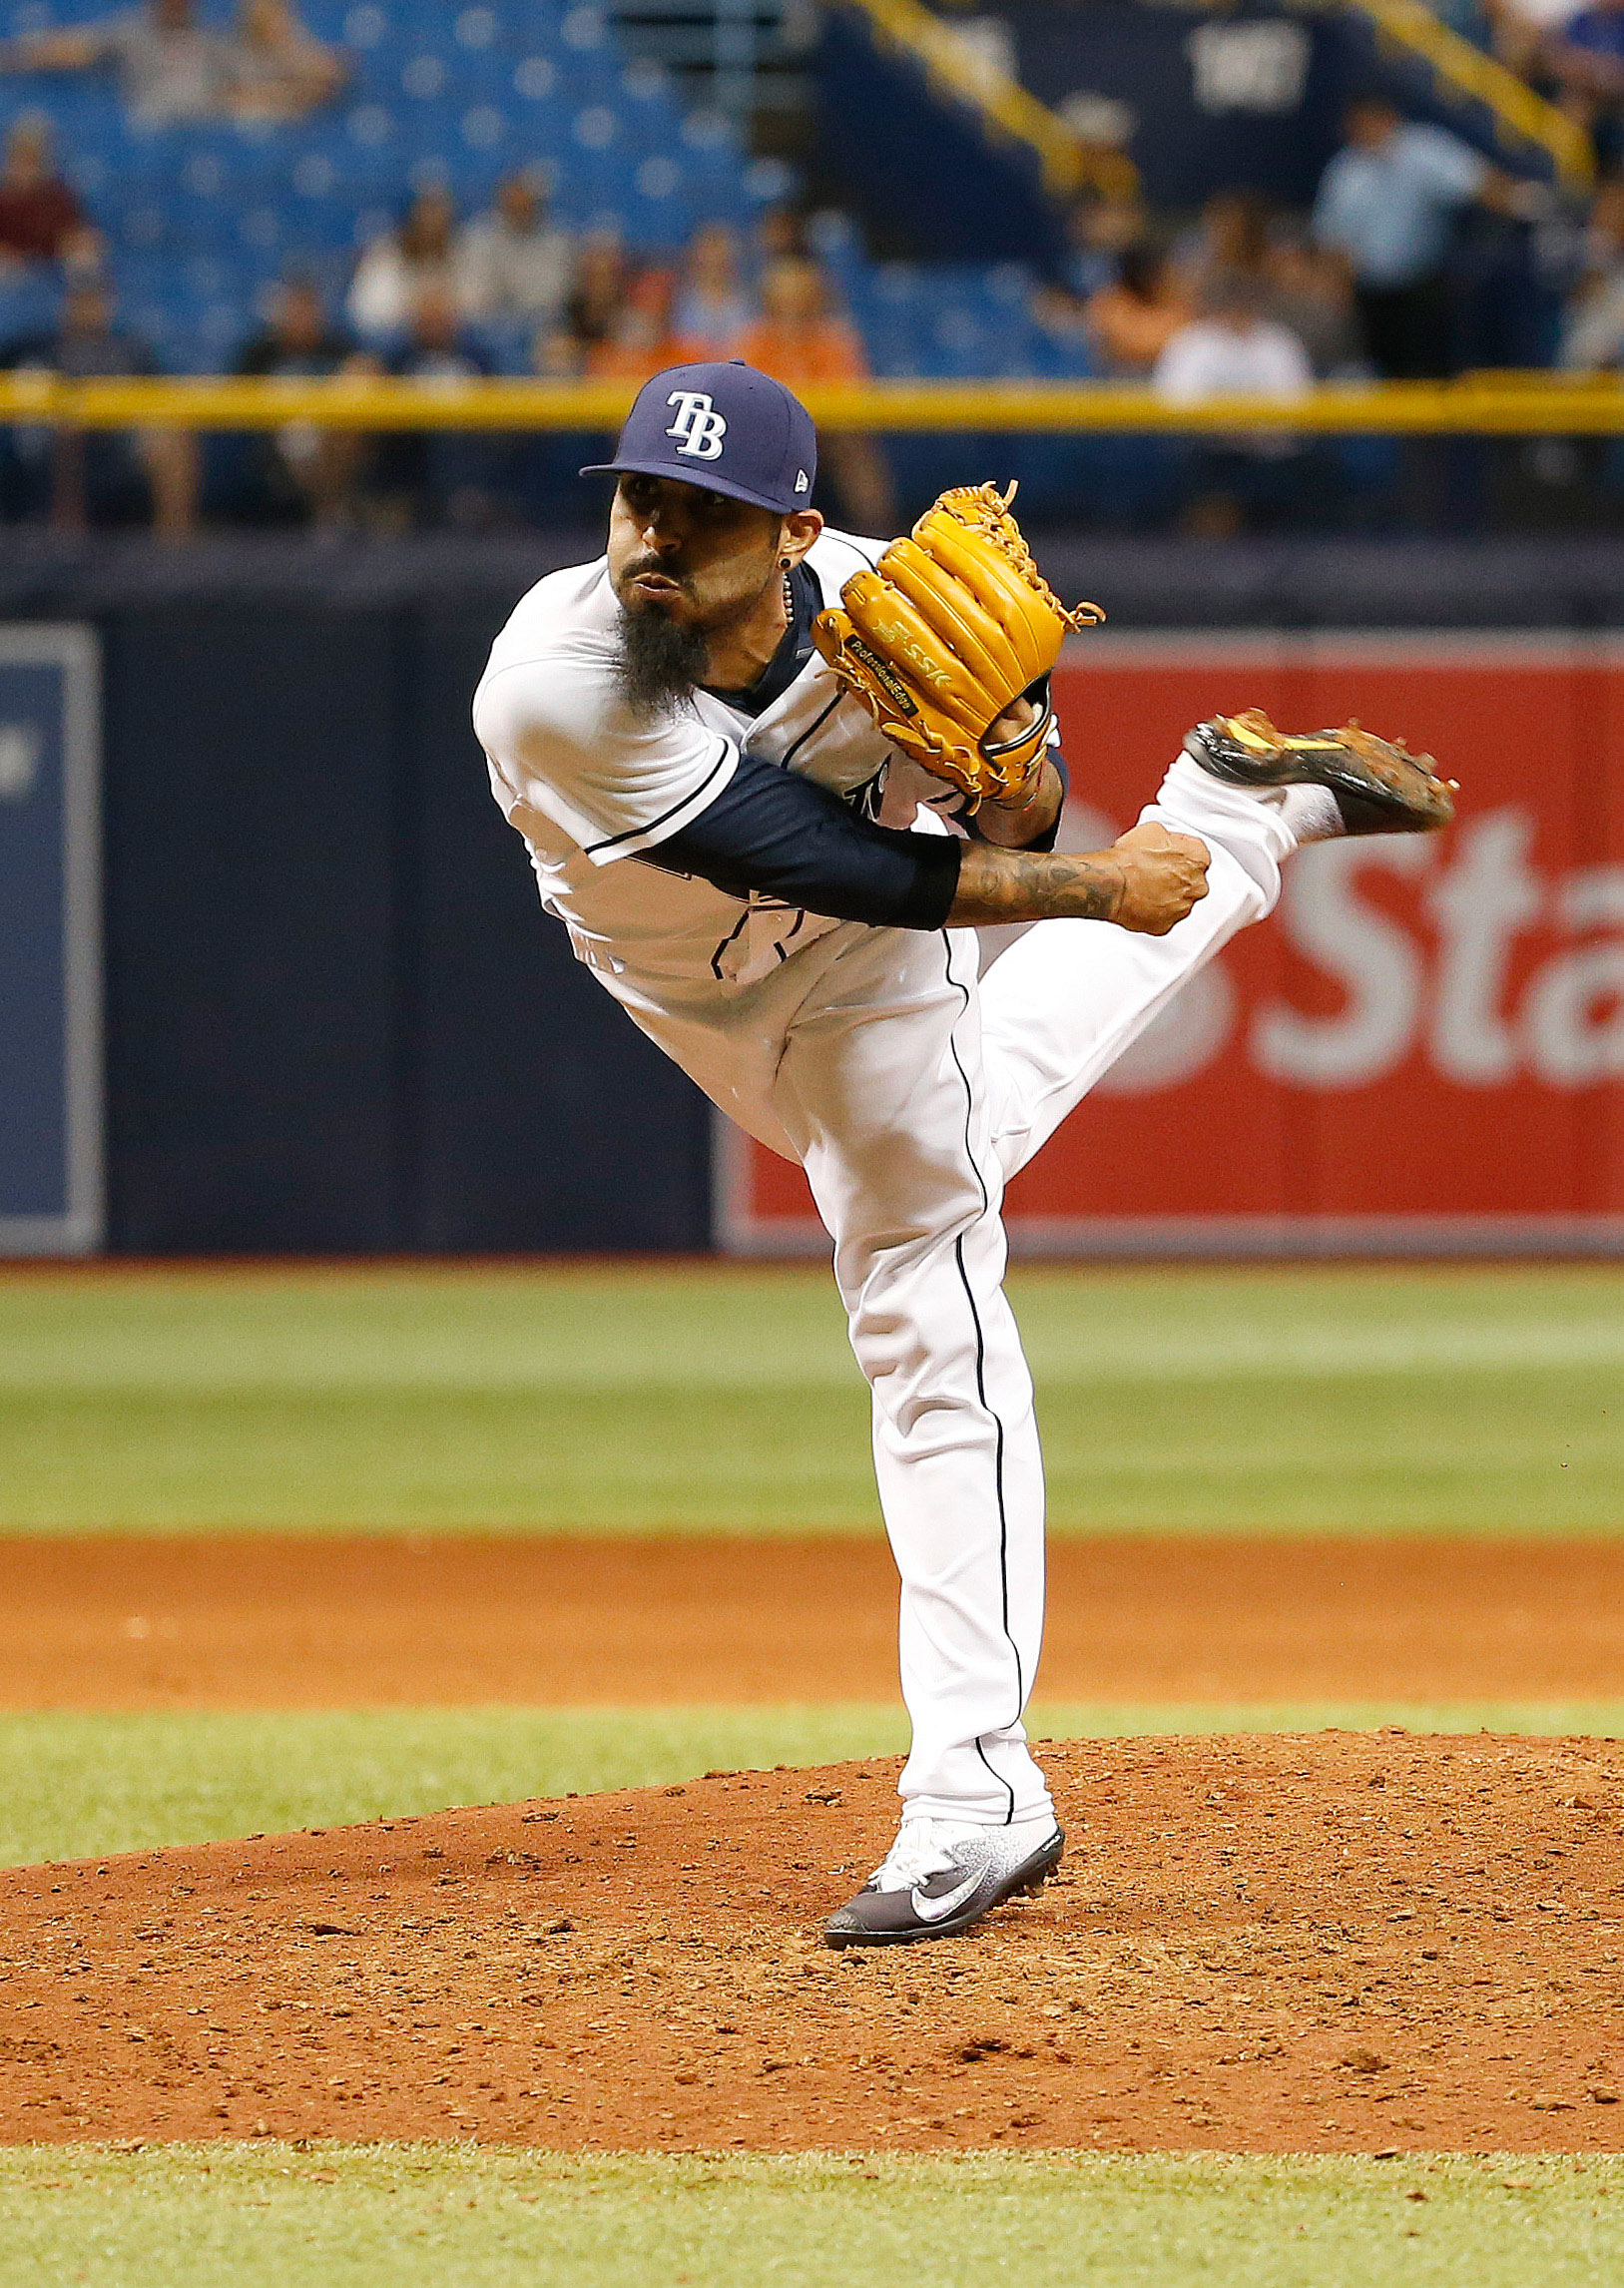 Sergio Romo agrees to deal with Dodgers